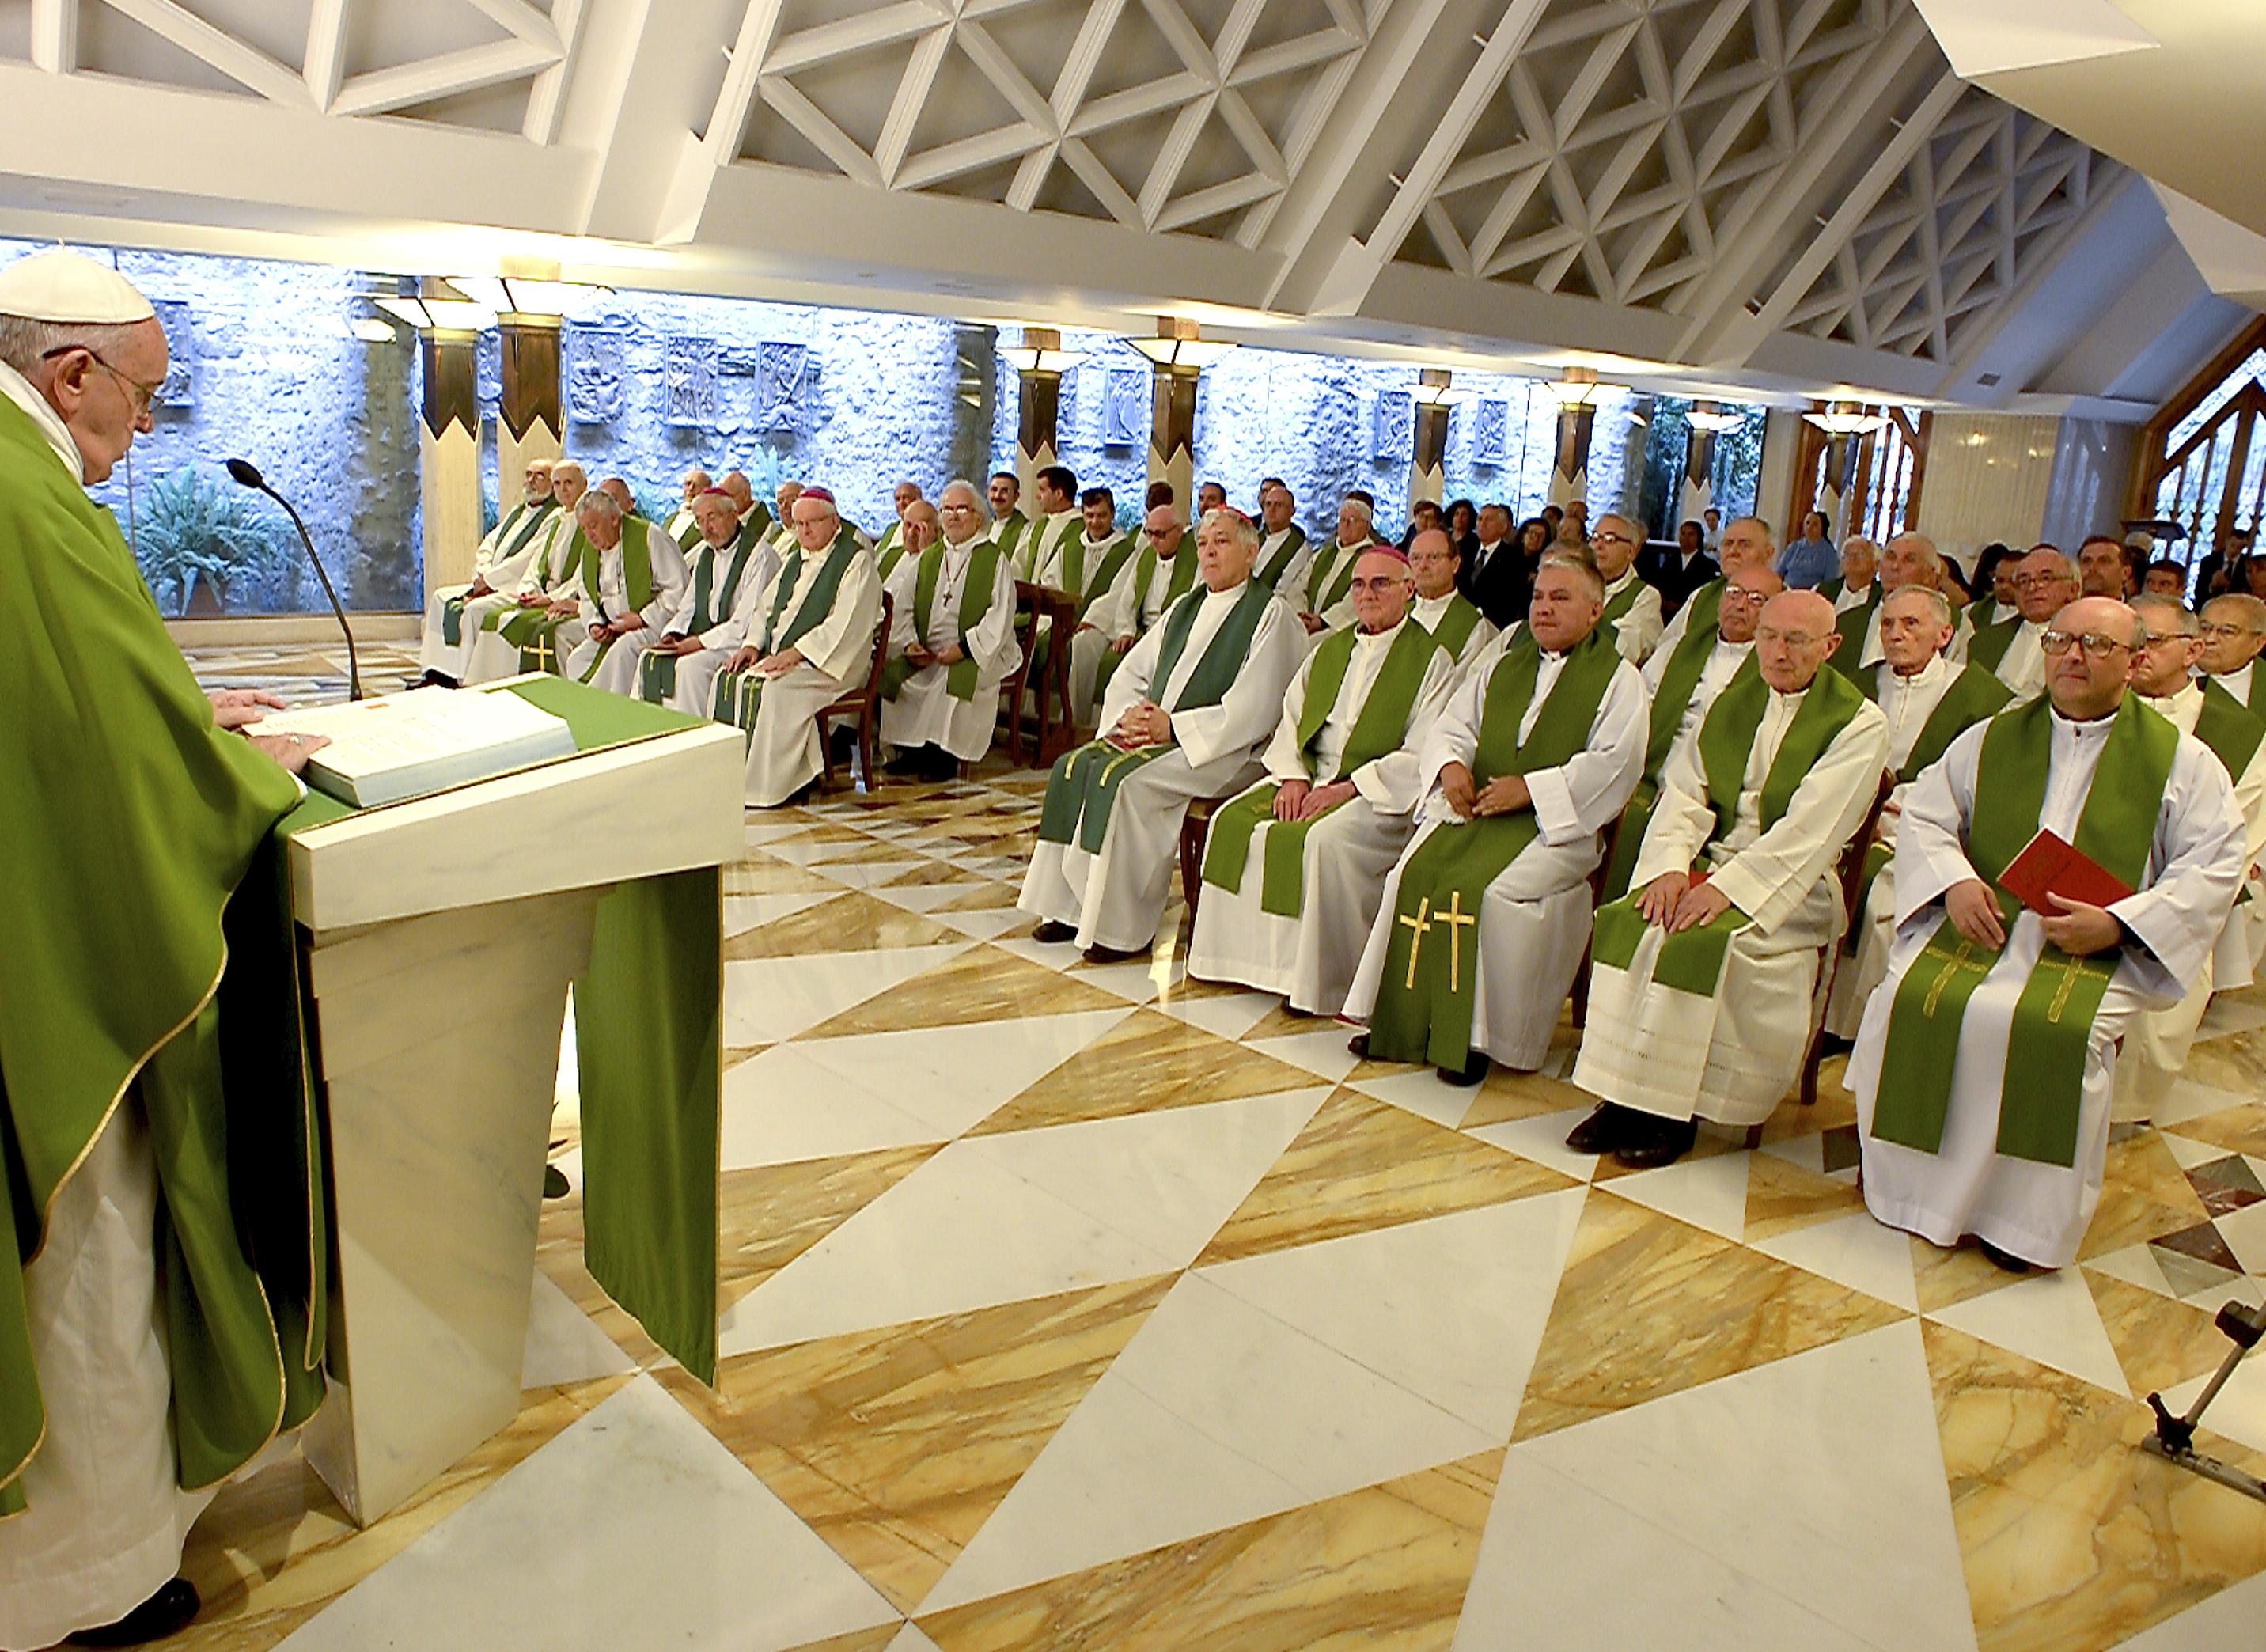 Pope Francis in Santa Marta during the homily. 2015 June 25